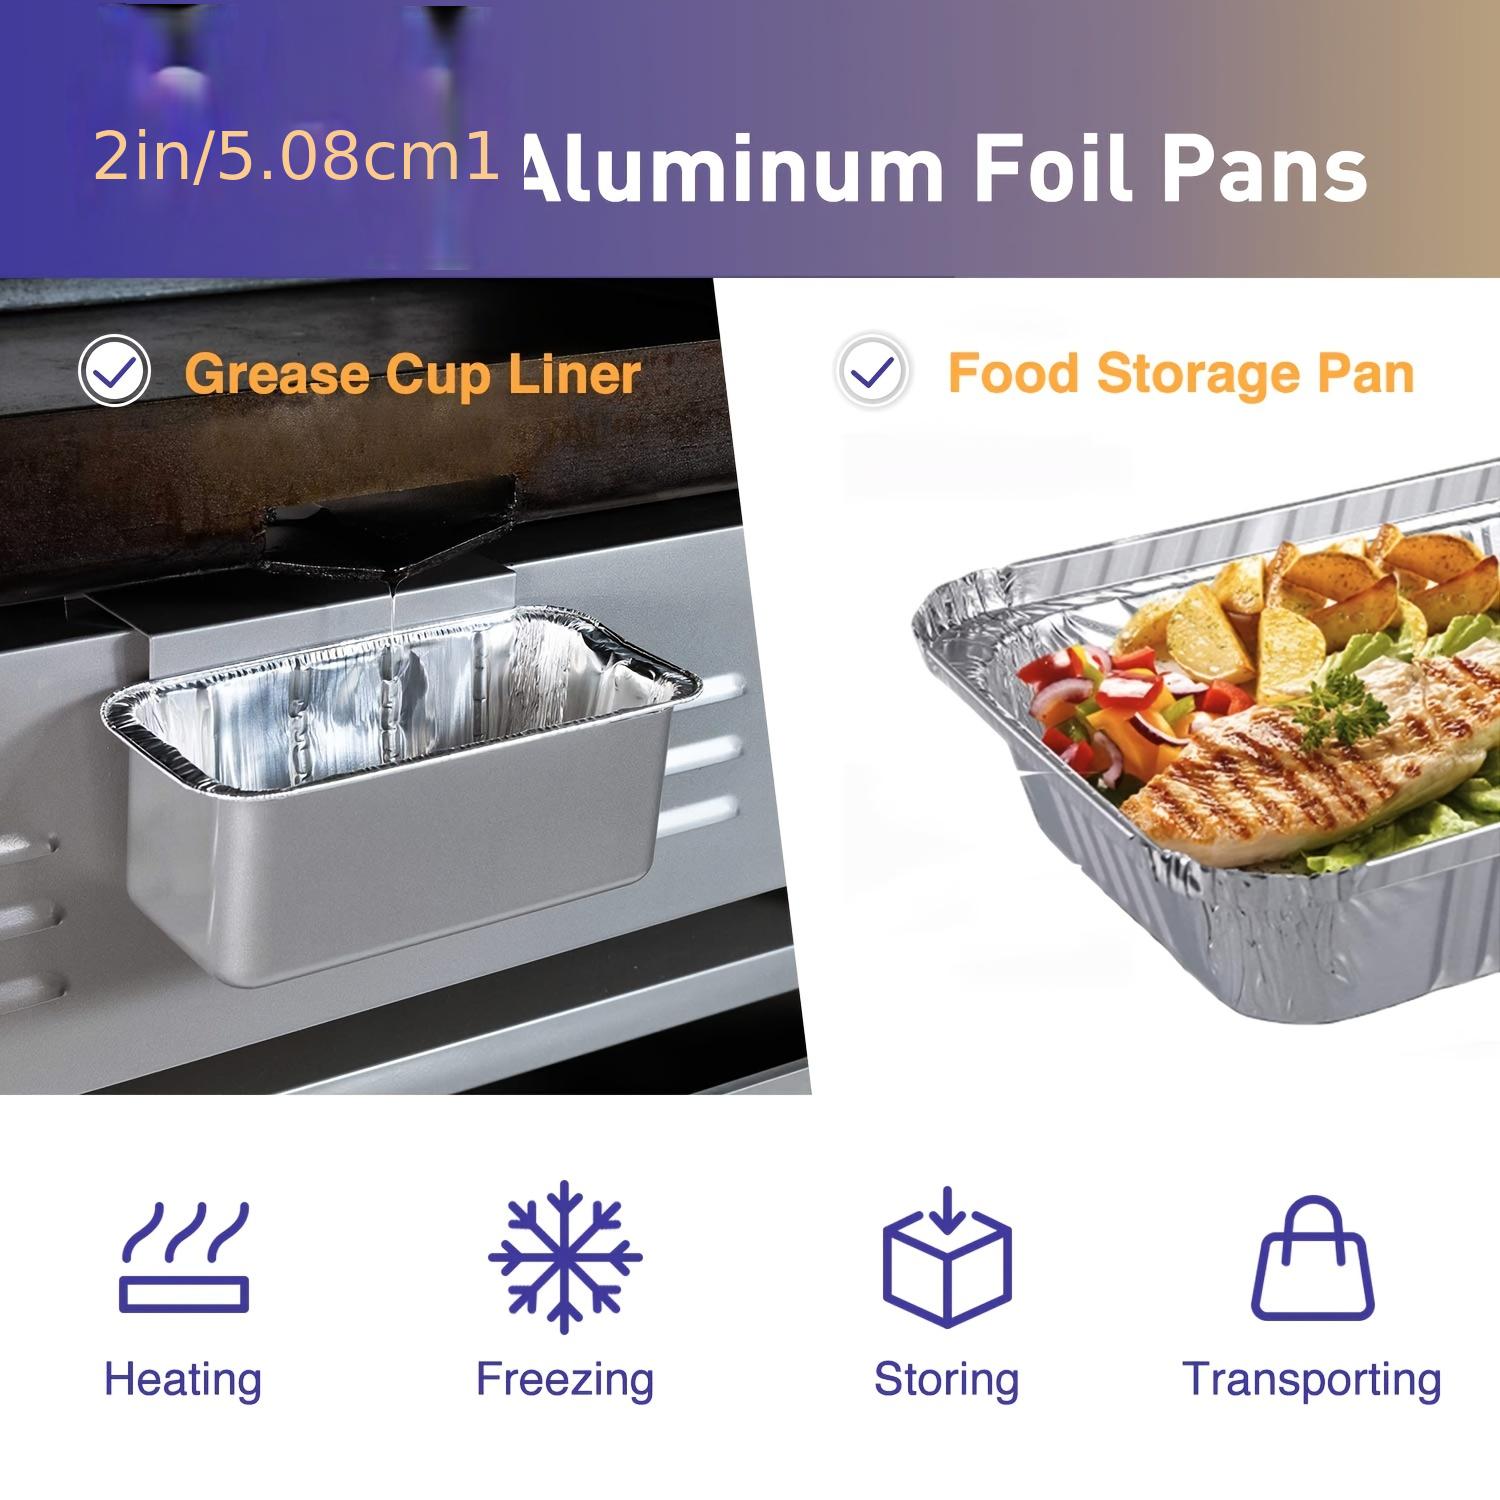 Fire Magic Drip Tray Foil Liners for 2020 and Newer Grills, Case